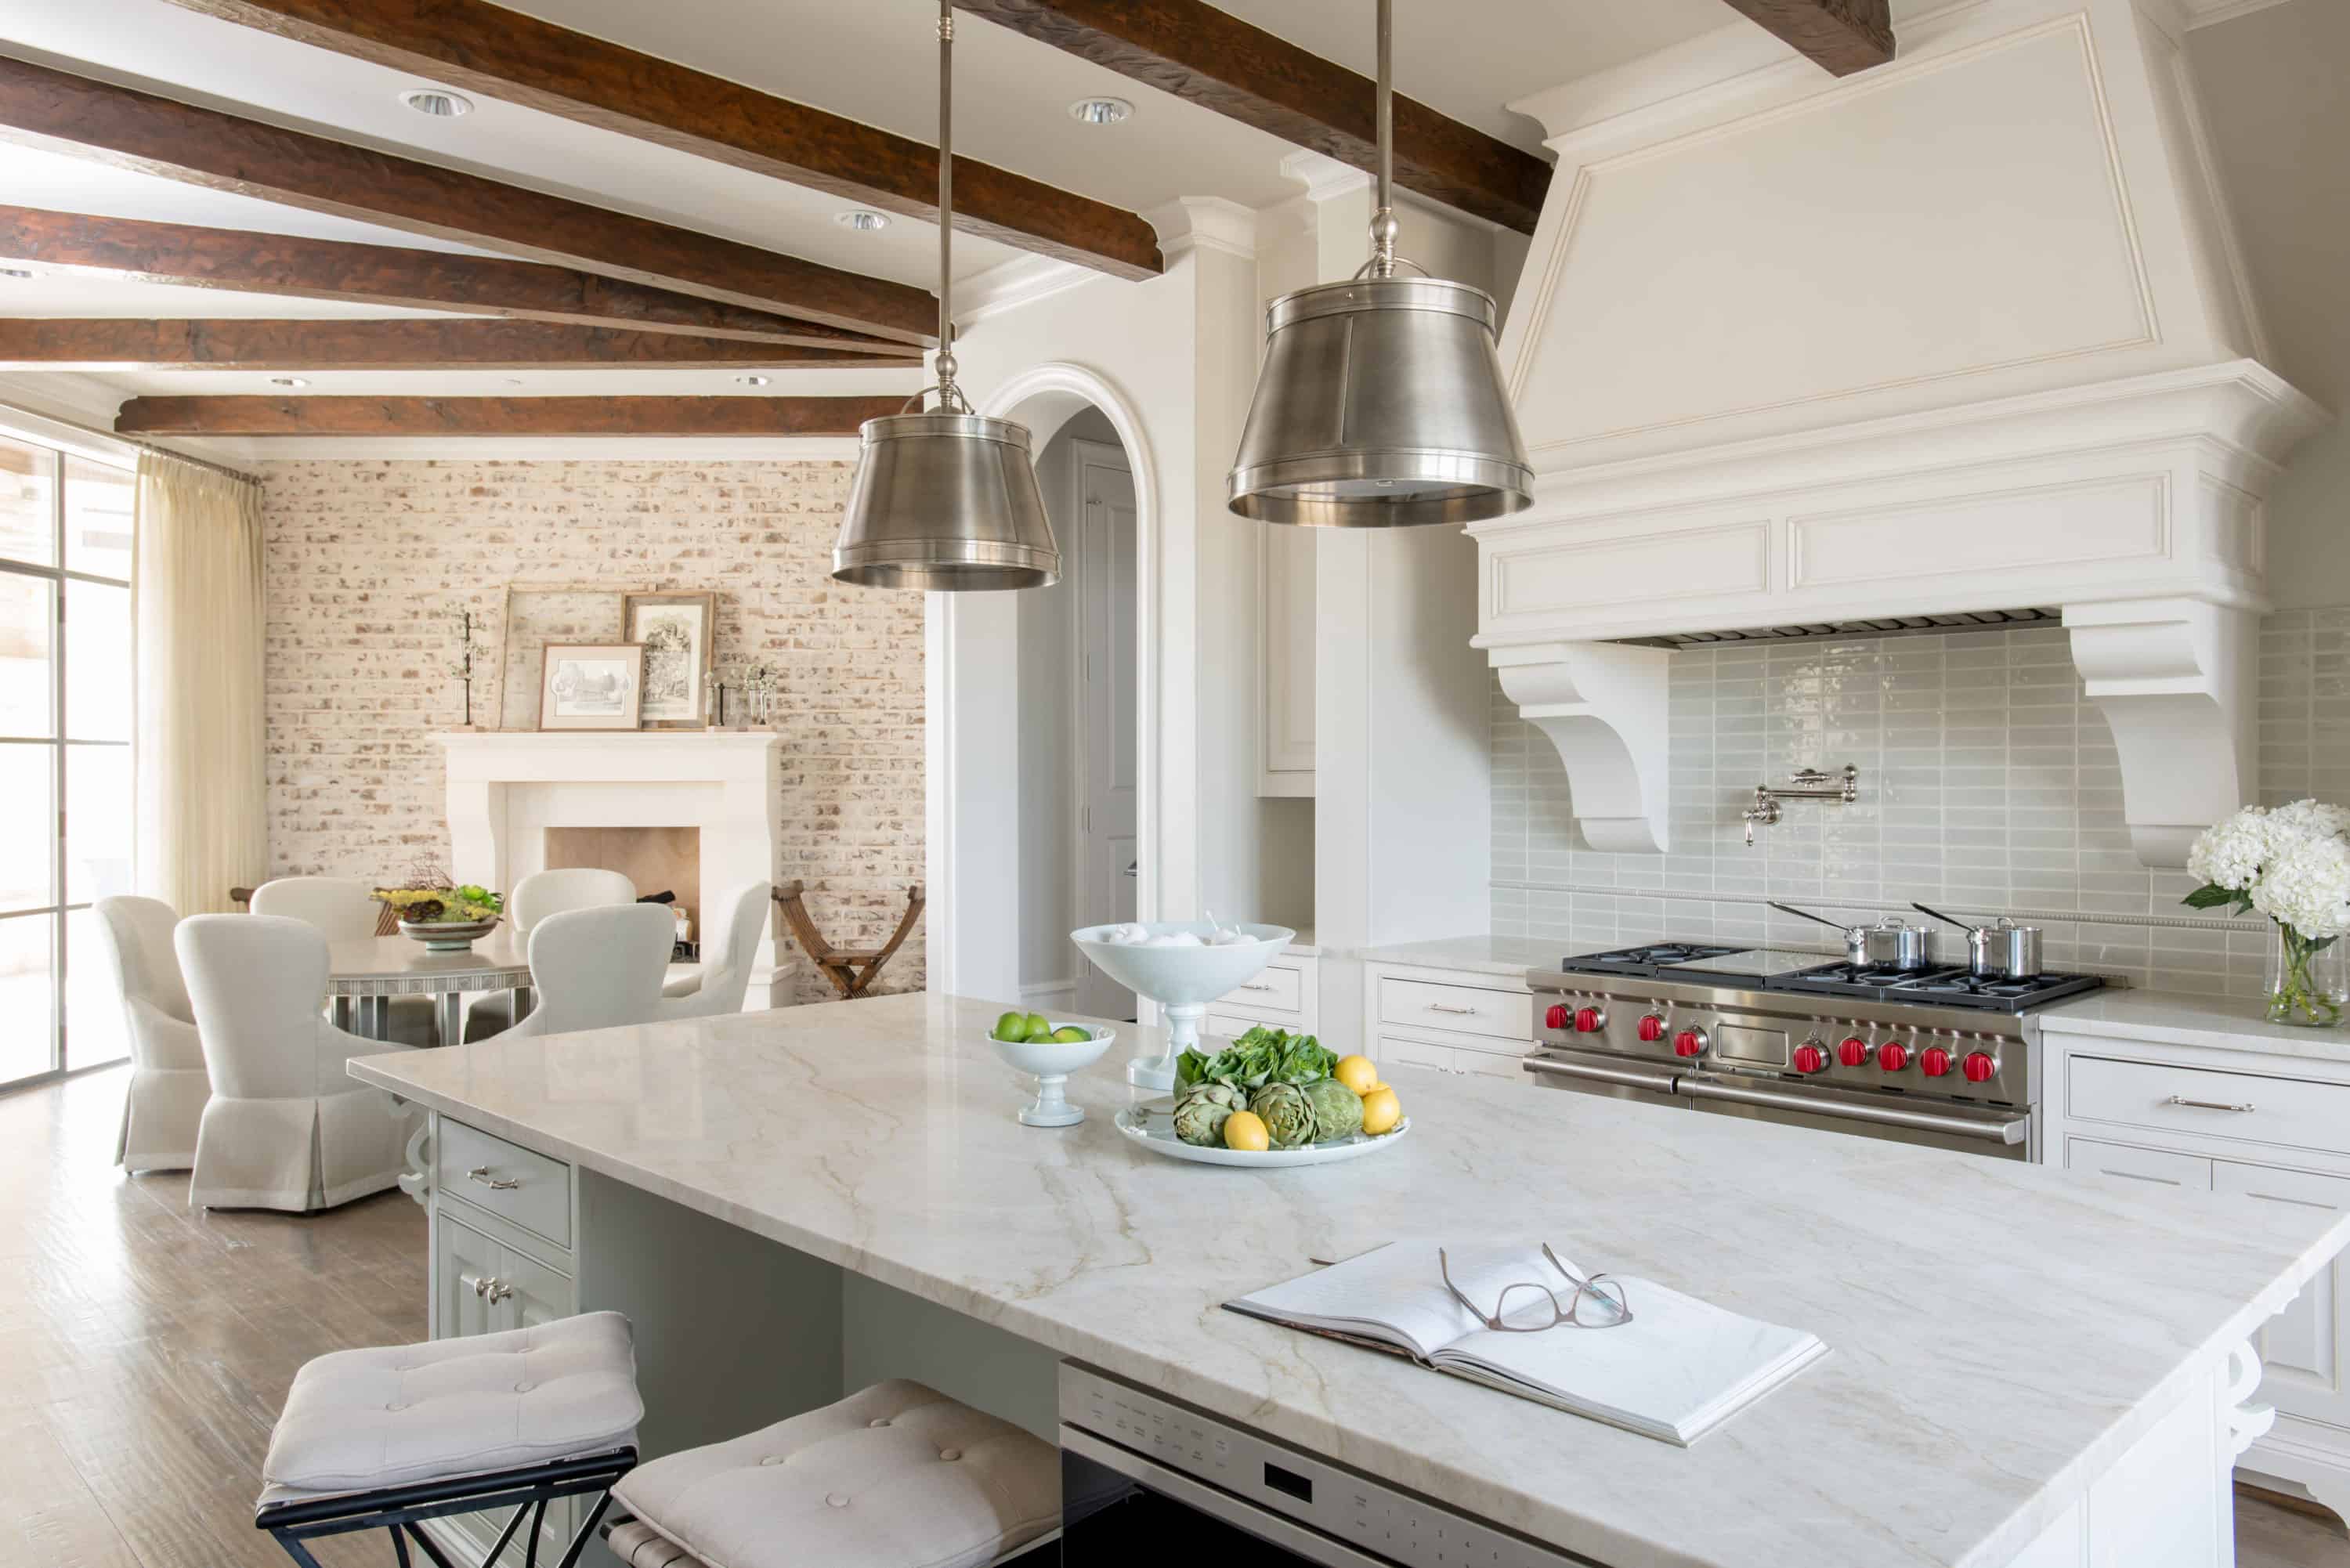 Natural wood and stone provide contrast in this kitchen